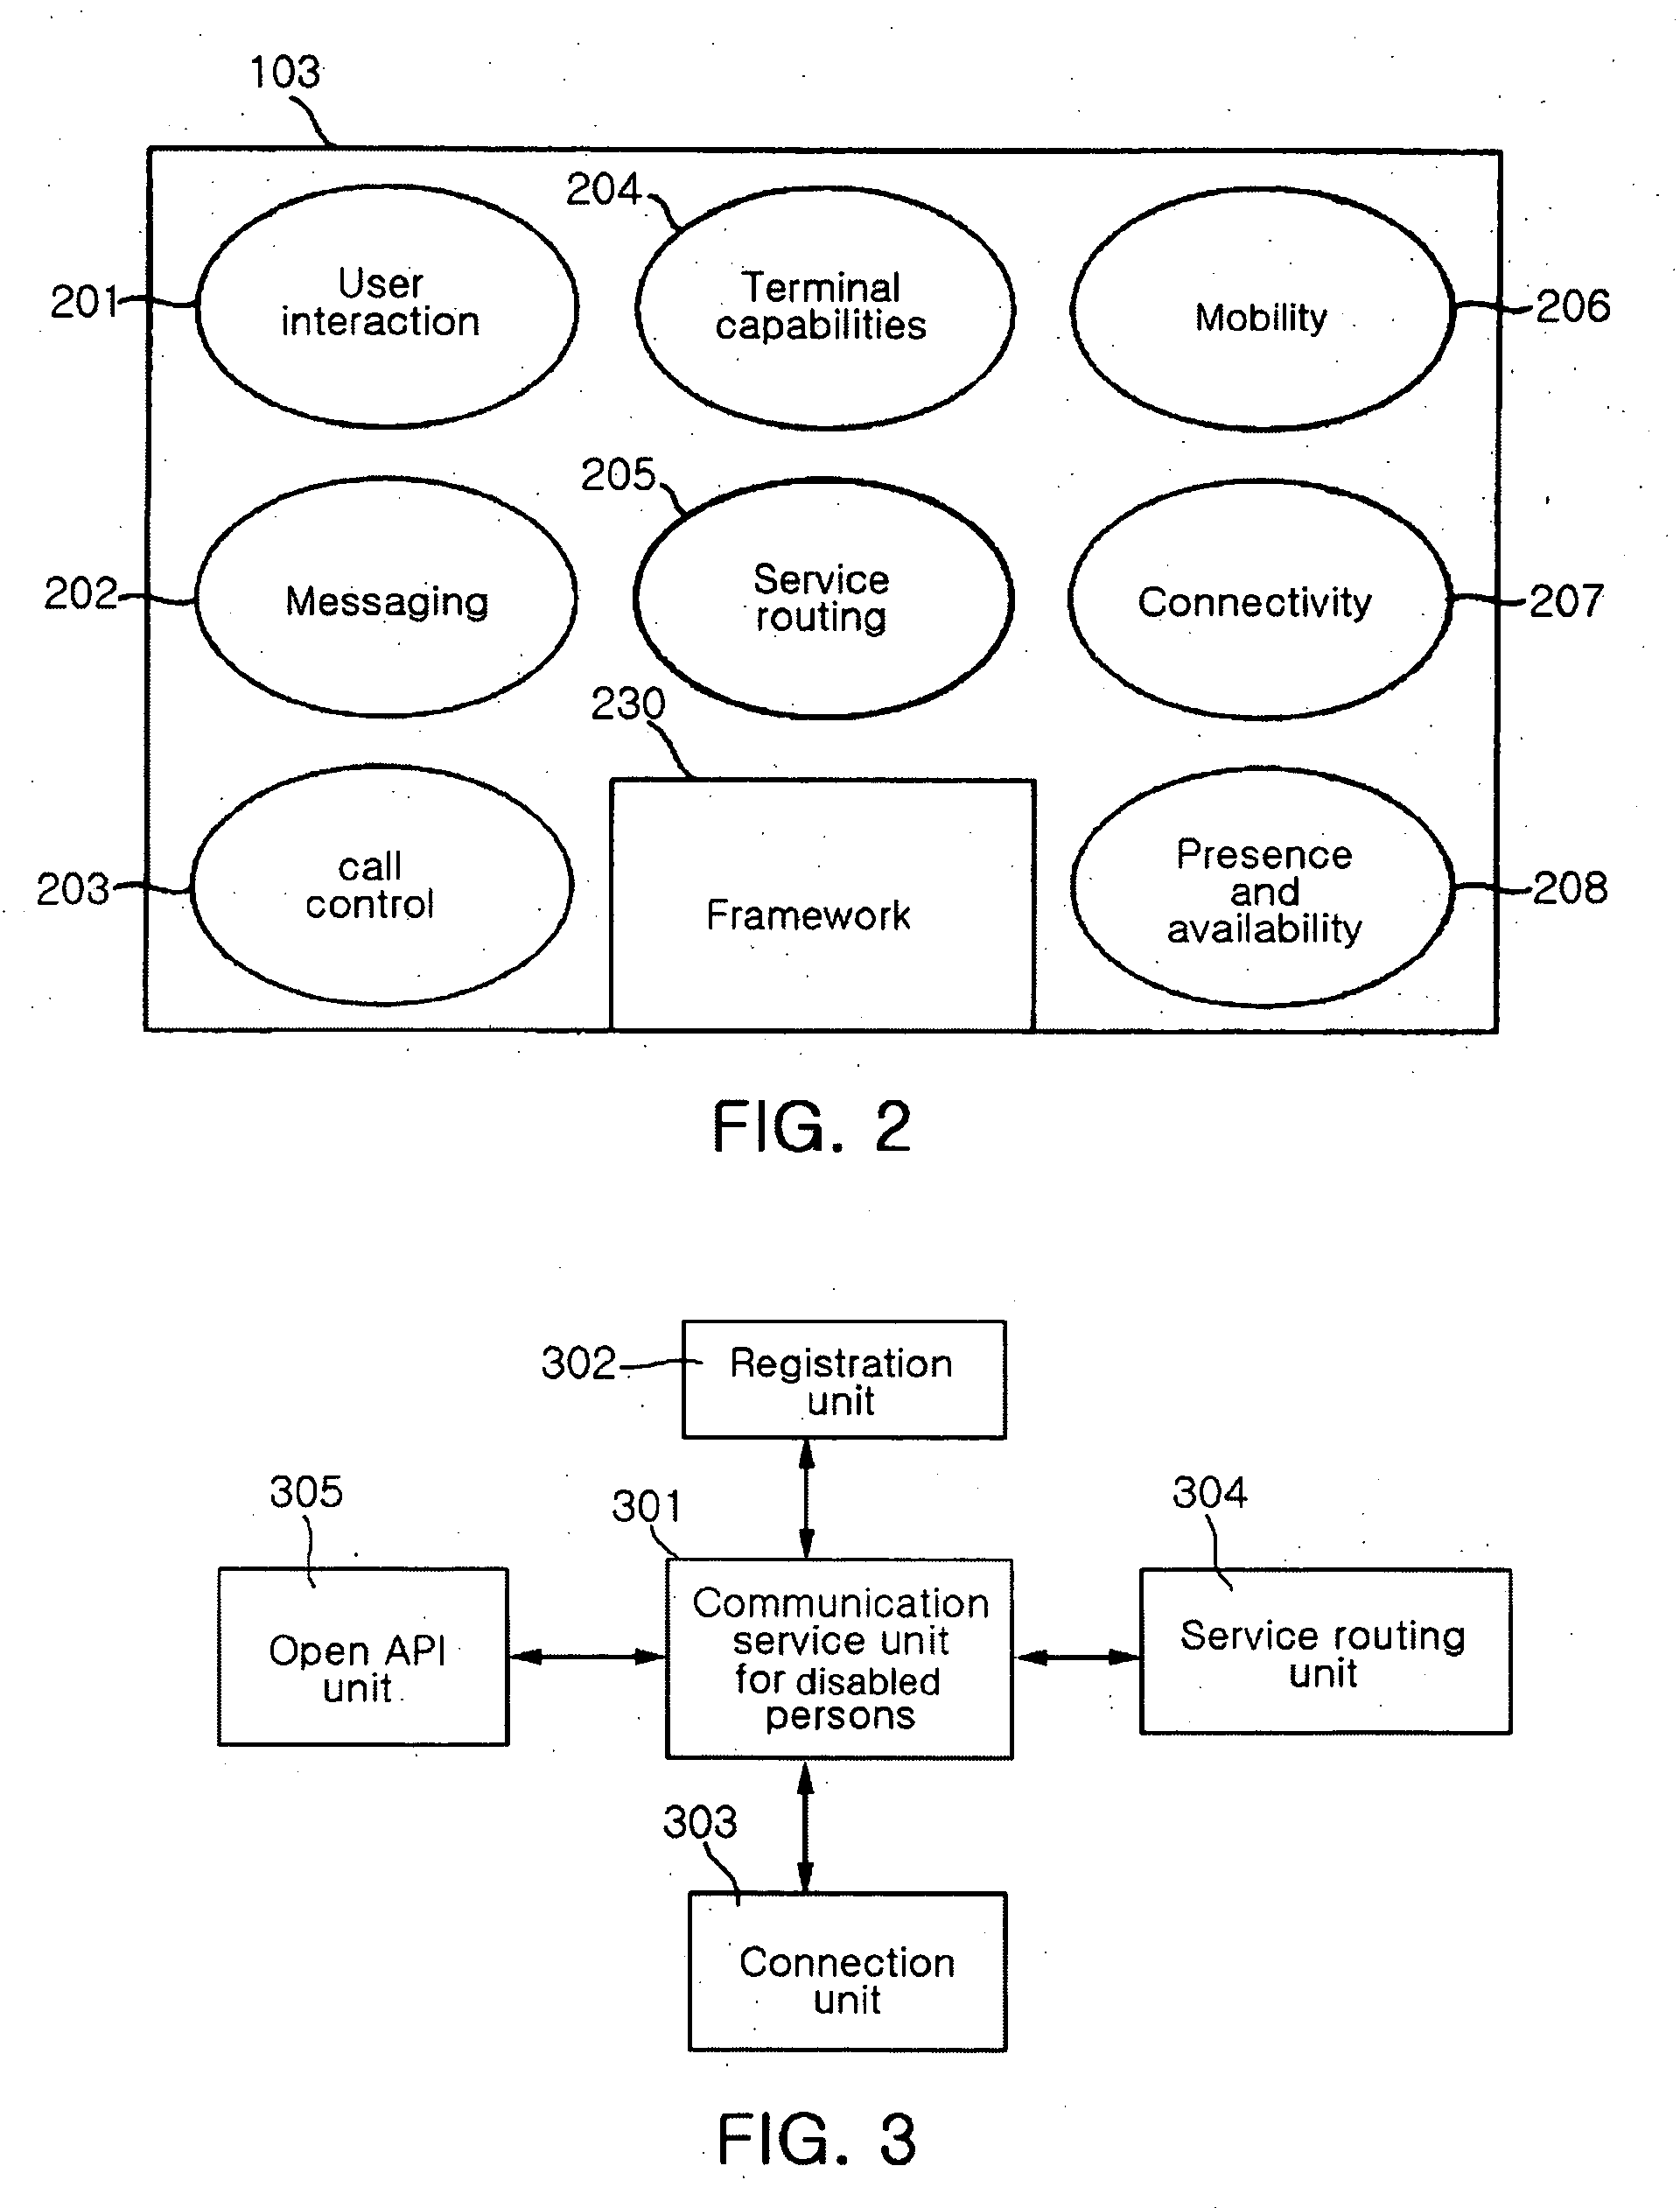 Communication service system and method based on open application programming interface for disabled persons